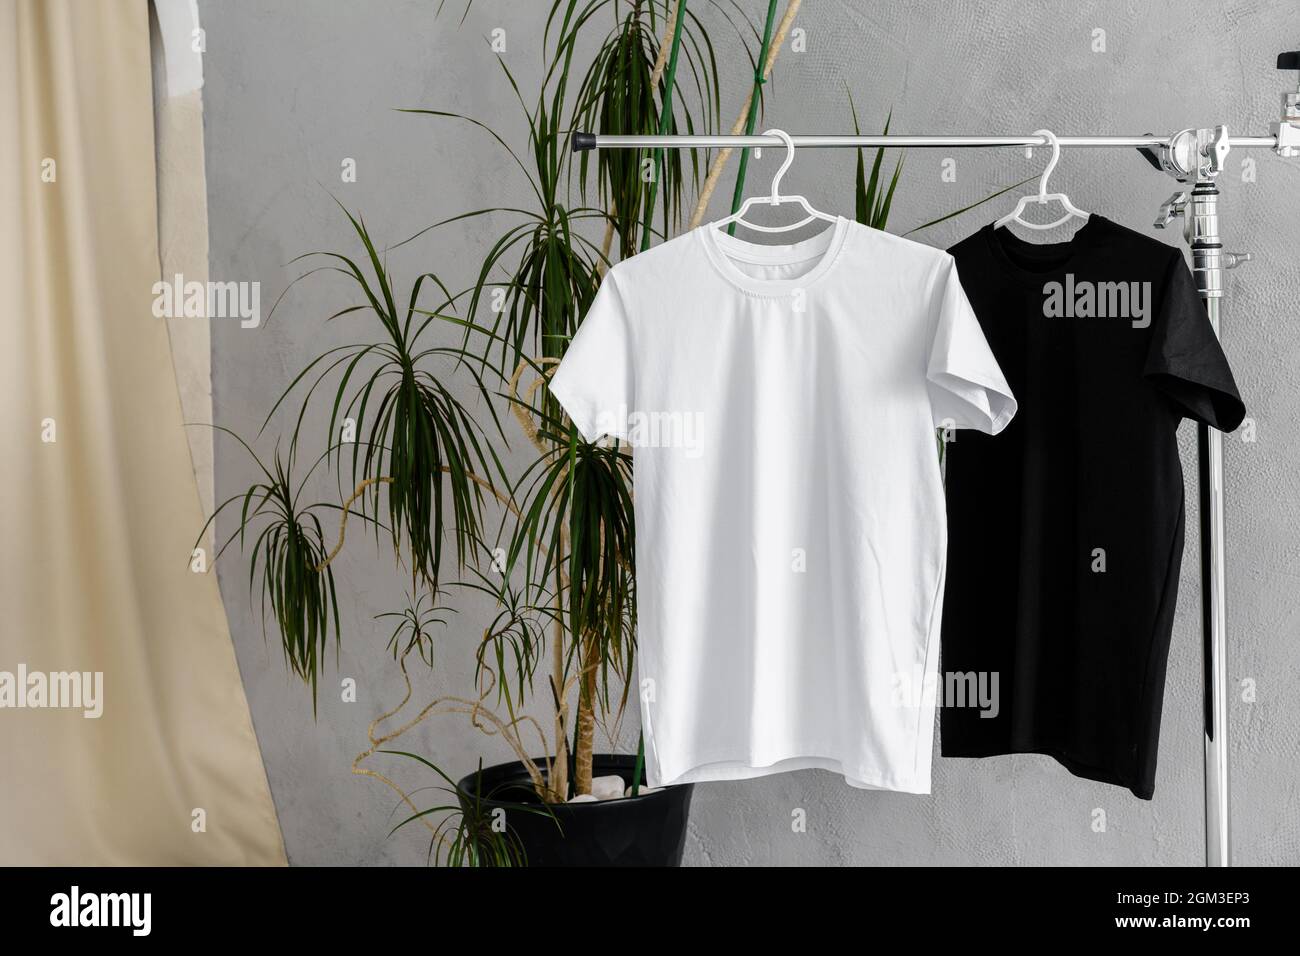 White and black T-shirts on hangers for design presentation Stock Photo